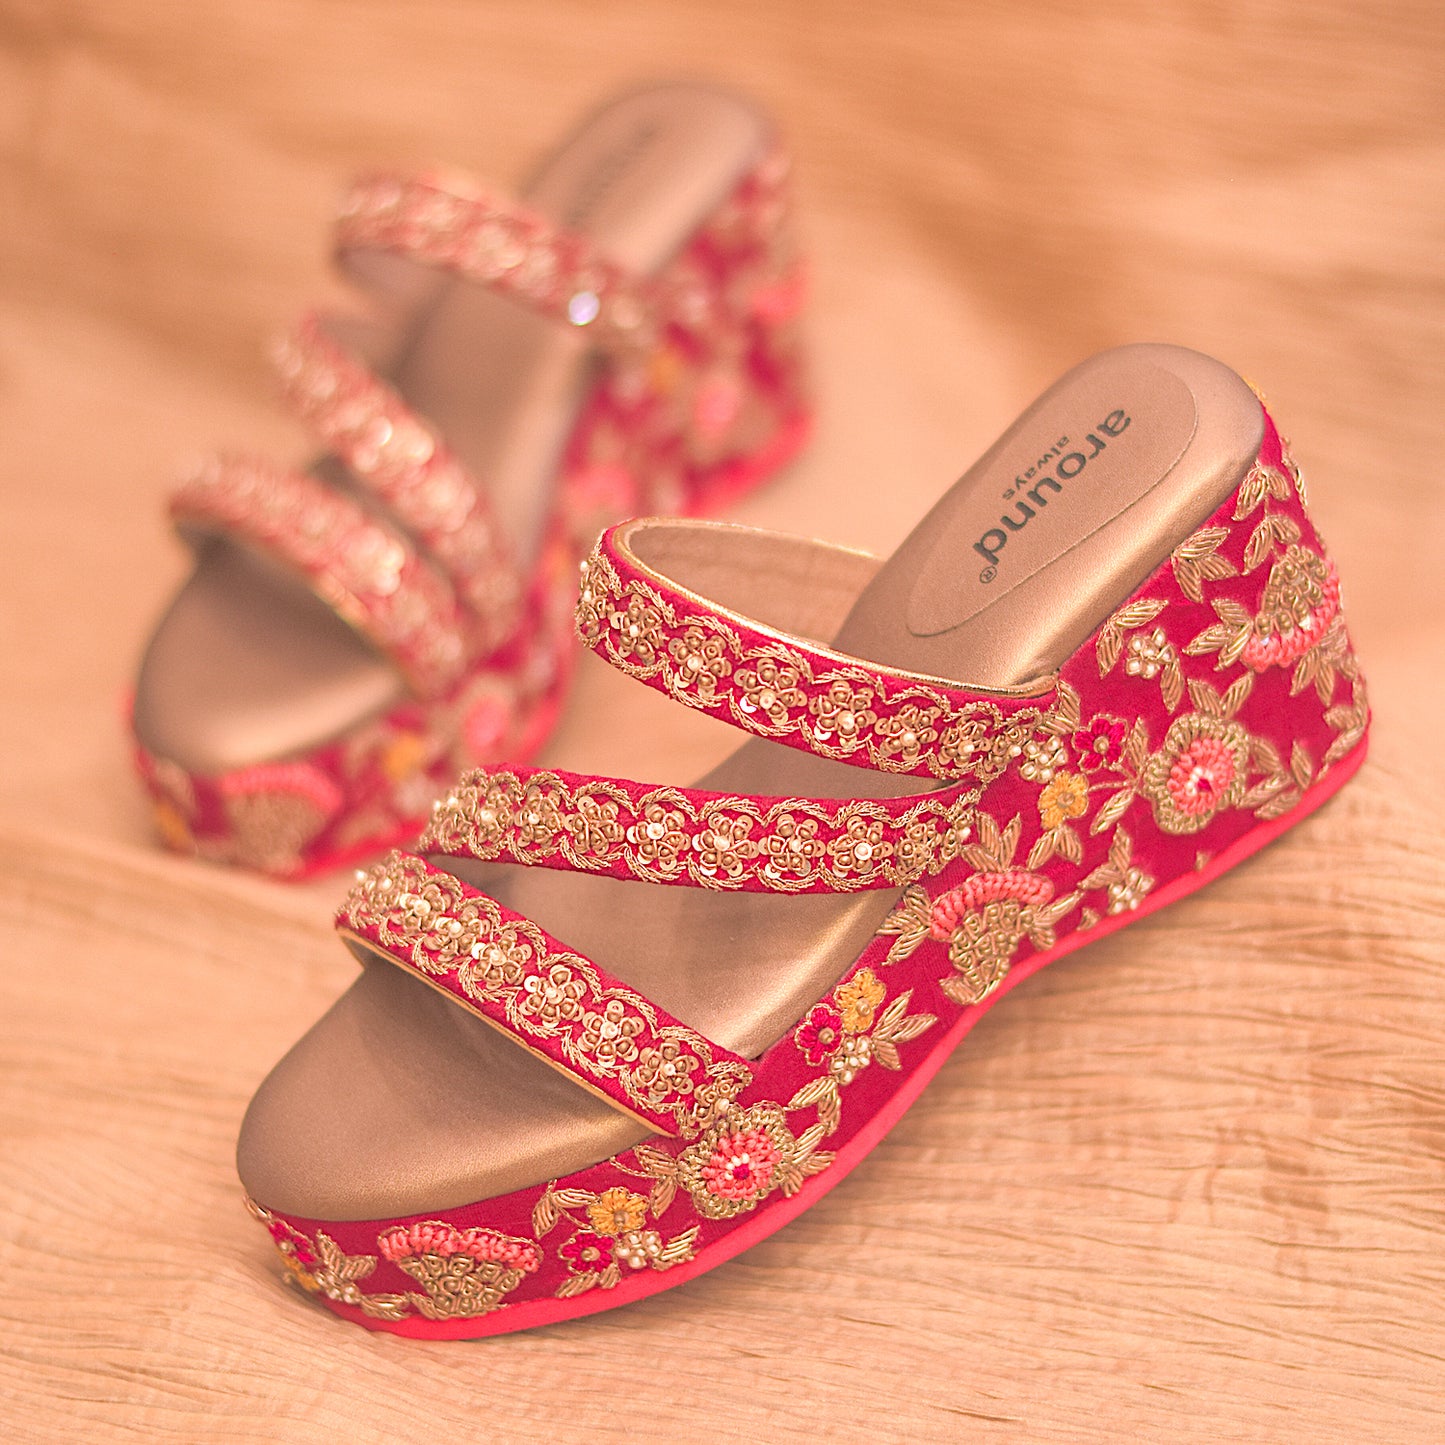 Embroidered bridal wedges in high heels